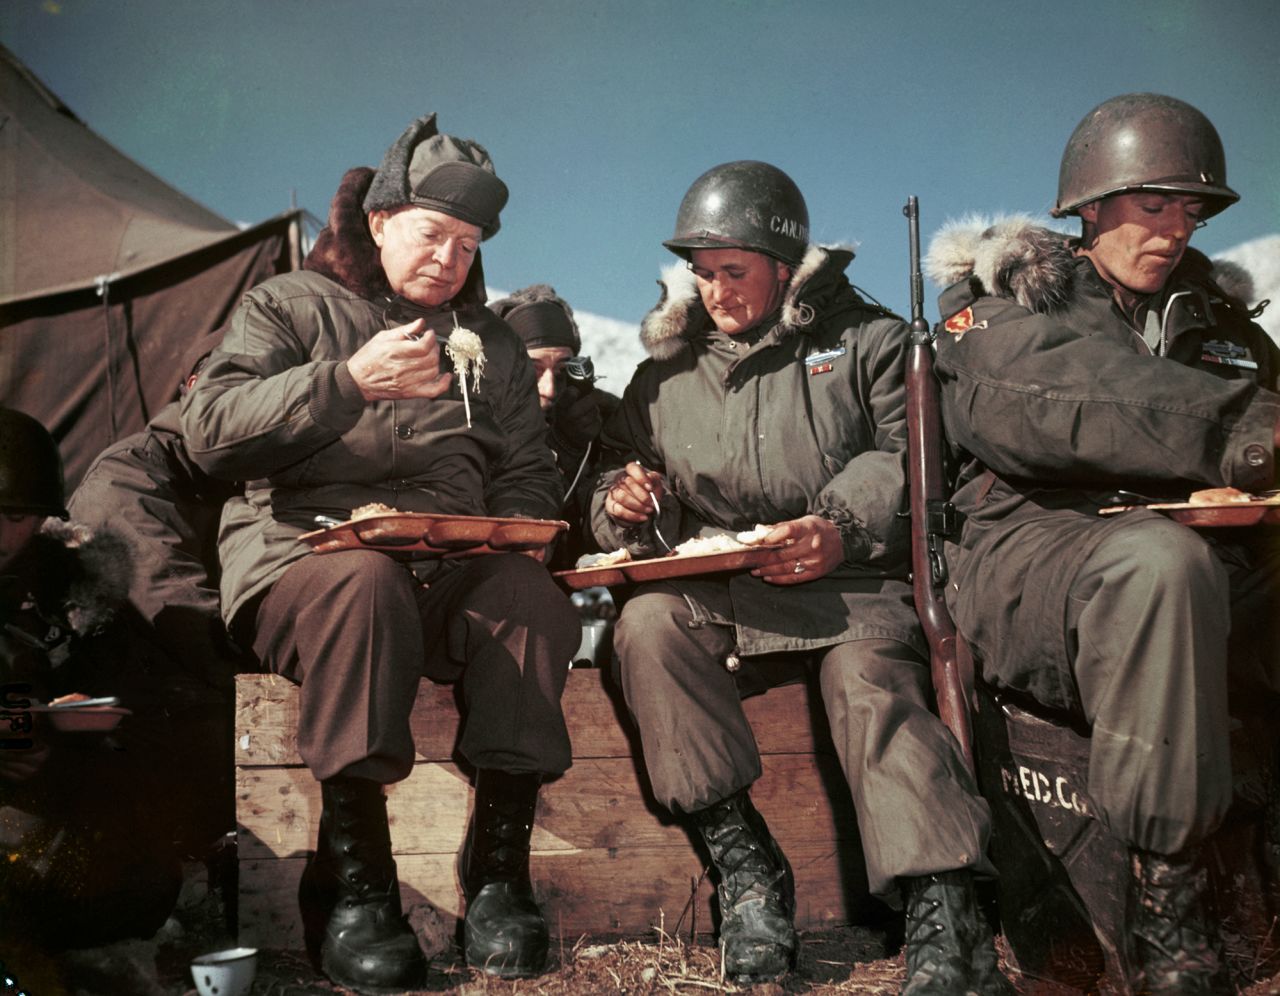 Eisenhower, as president-elect, eats with American soldiers on the front lines of the Korean War in December 1952.